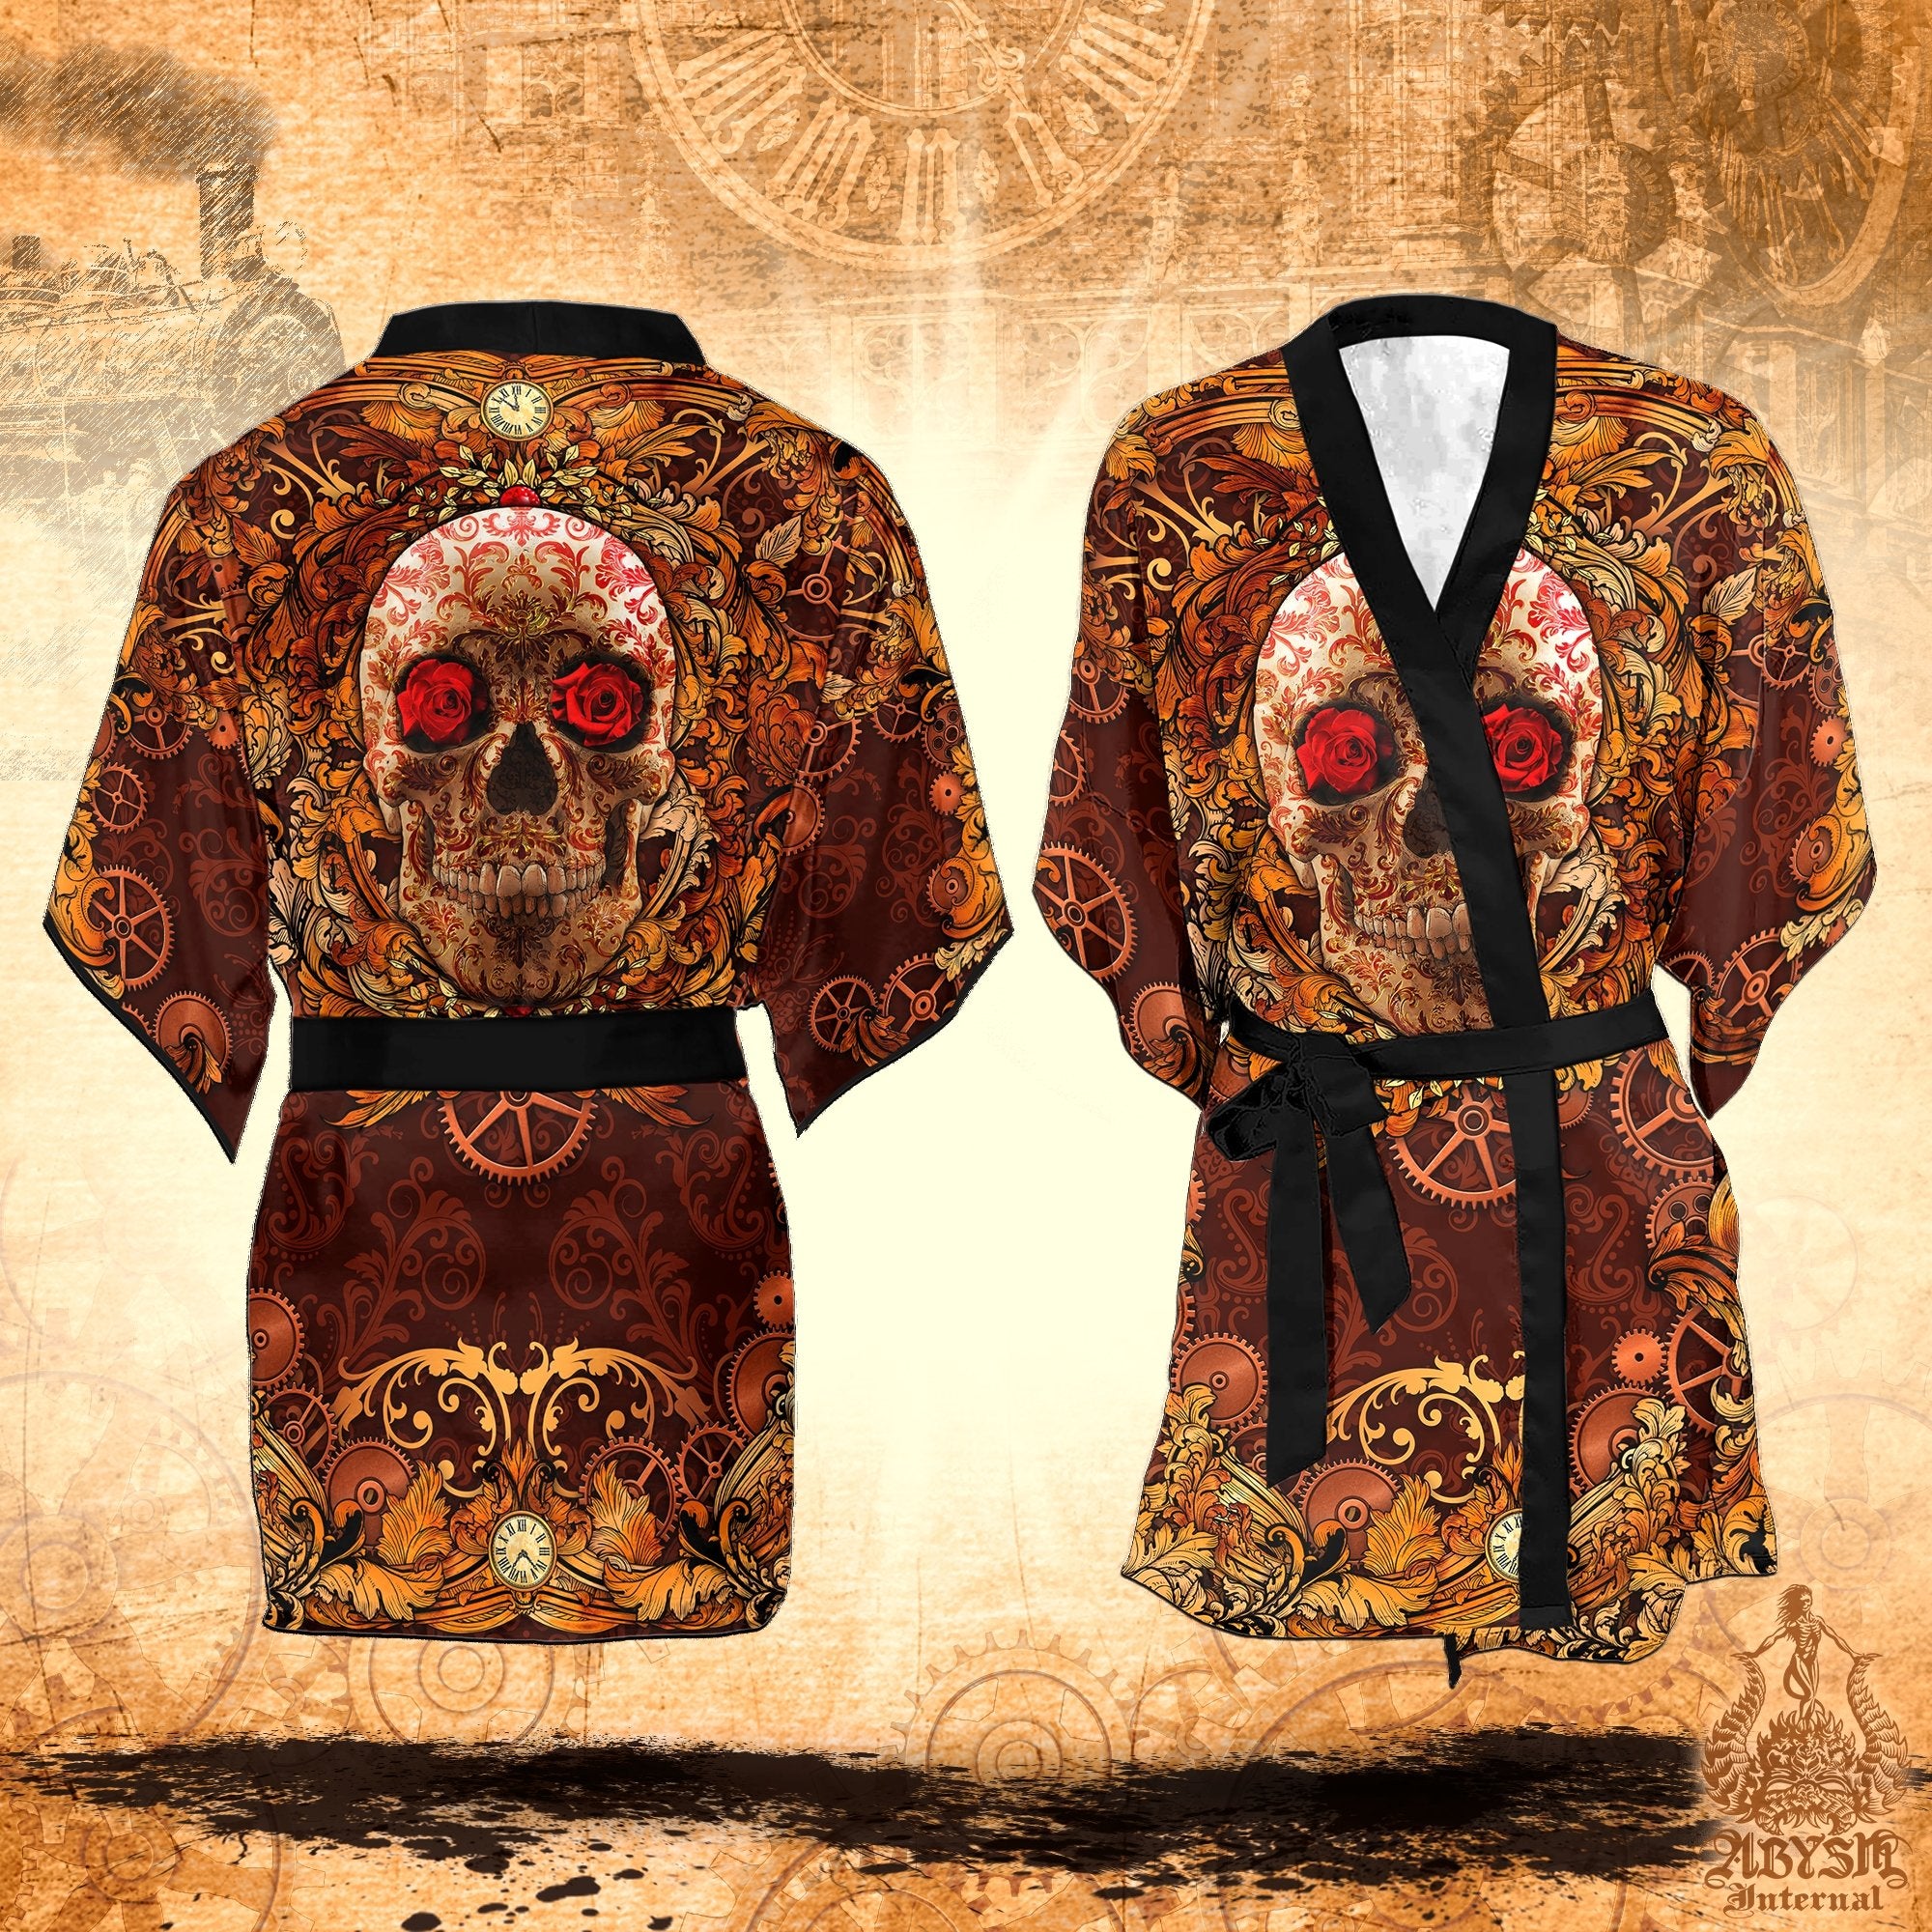 Skull Cover Up, Beach Outfit, Party Kimono, Summer Festival Robe, Indie and Alternative Clothing, Unisex - Steampunk - Abysm Internal